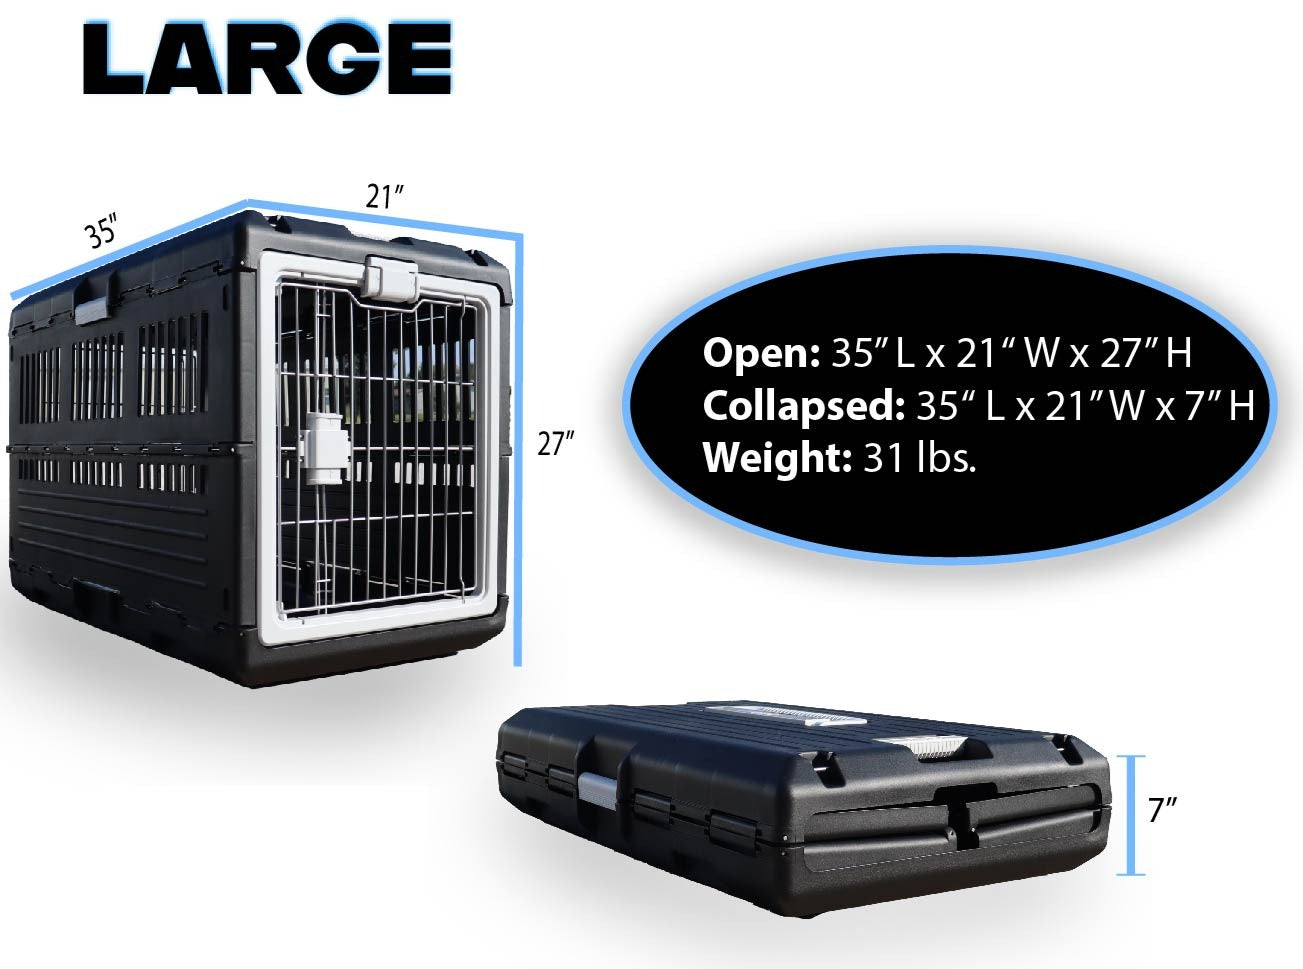 A photo of the Mirapet Large Collapsible pet crate standing, and also closed with measurements around the sides. A black oval with white text that says "Open: 35' L x 21" W x 27"H Collapsed: 35"L x 21"W x7"H Weight: 31lbs